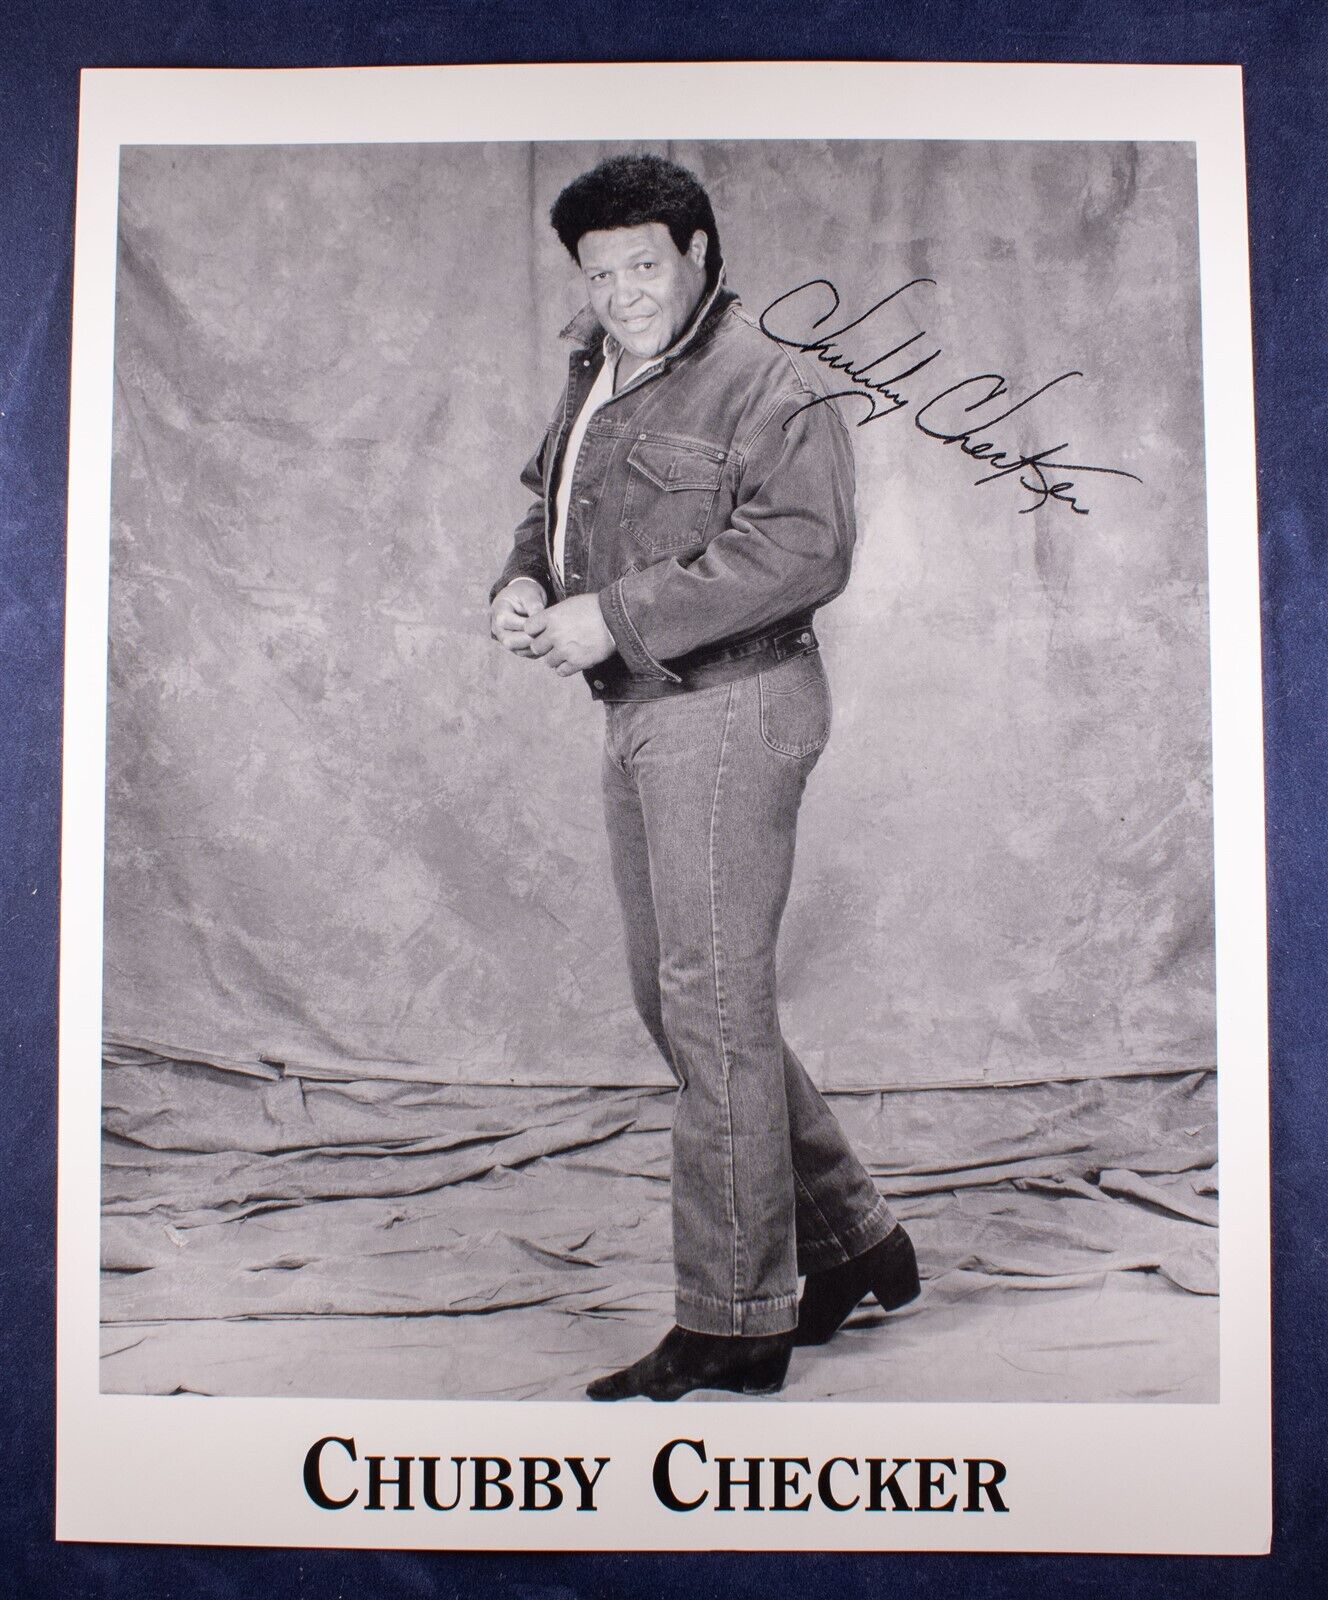 Chubby Checker 8x10 Autographed Photo American Rock N Roll Singer and Dancer